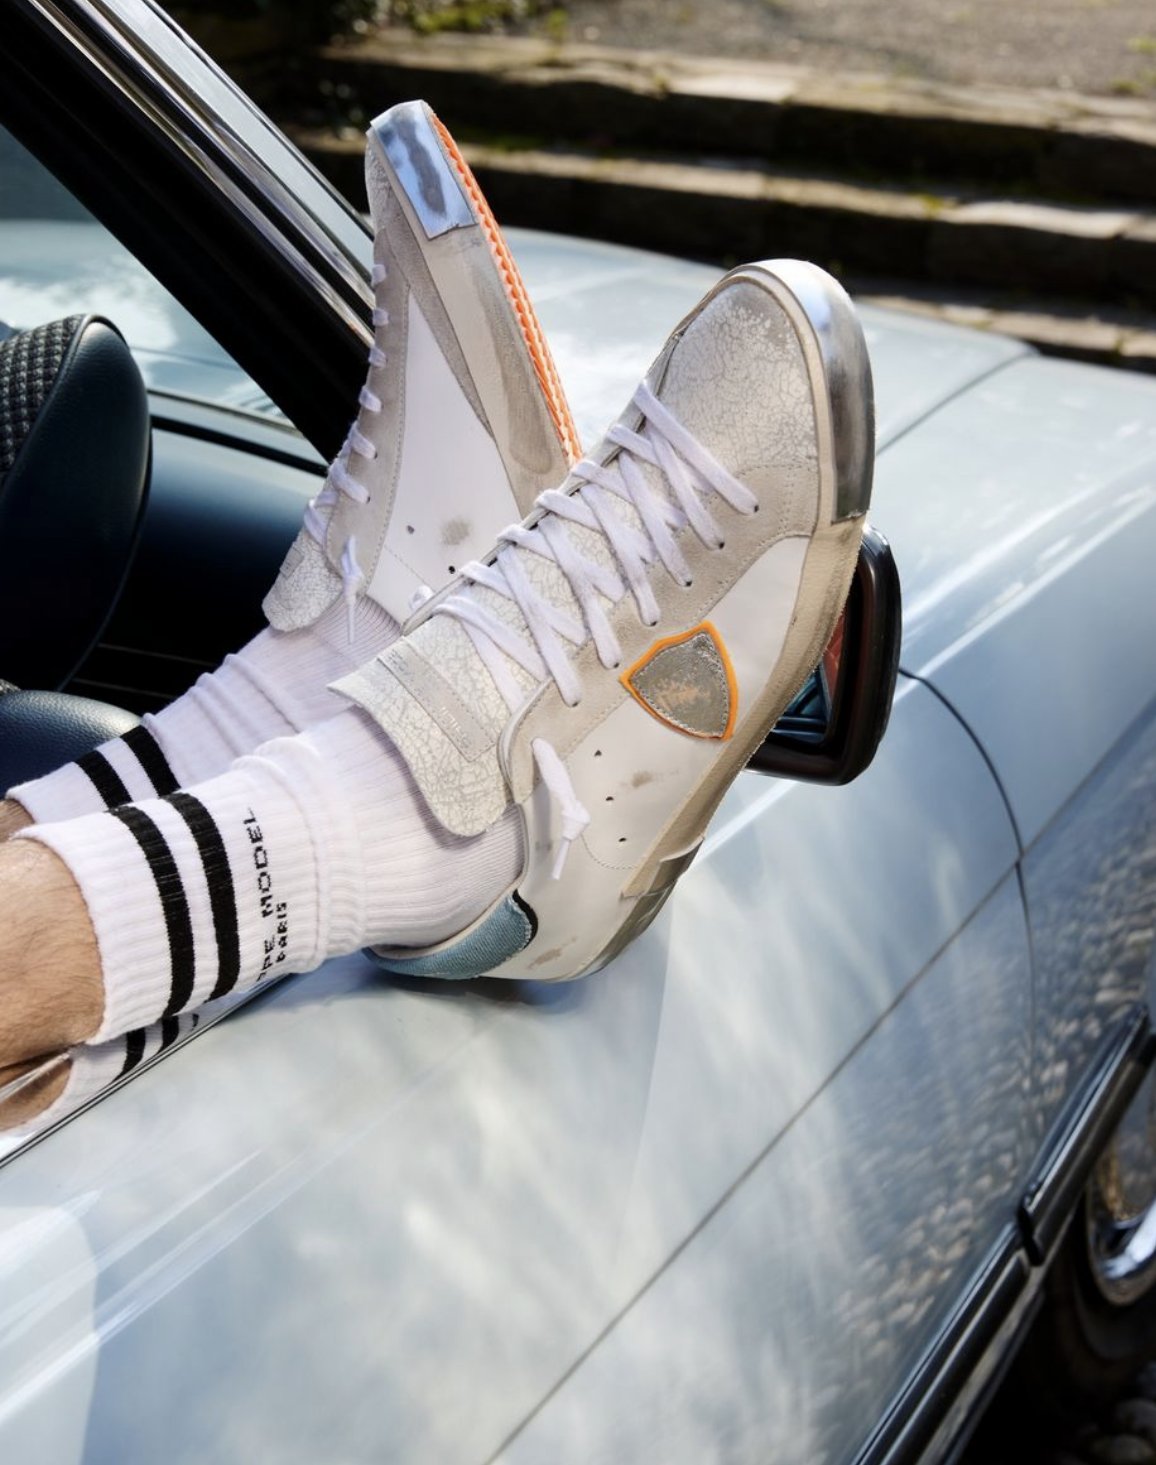 Shop our collection of Men's Designer Shoes Sydney - Golden Goose men's sneakers and more. Shop instore and online now at Riada Concept Luxury Fashion Boutique Australia.